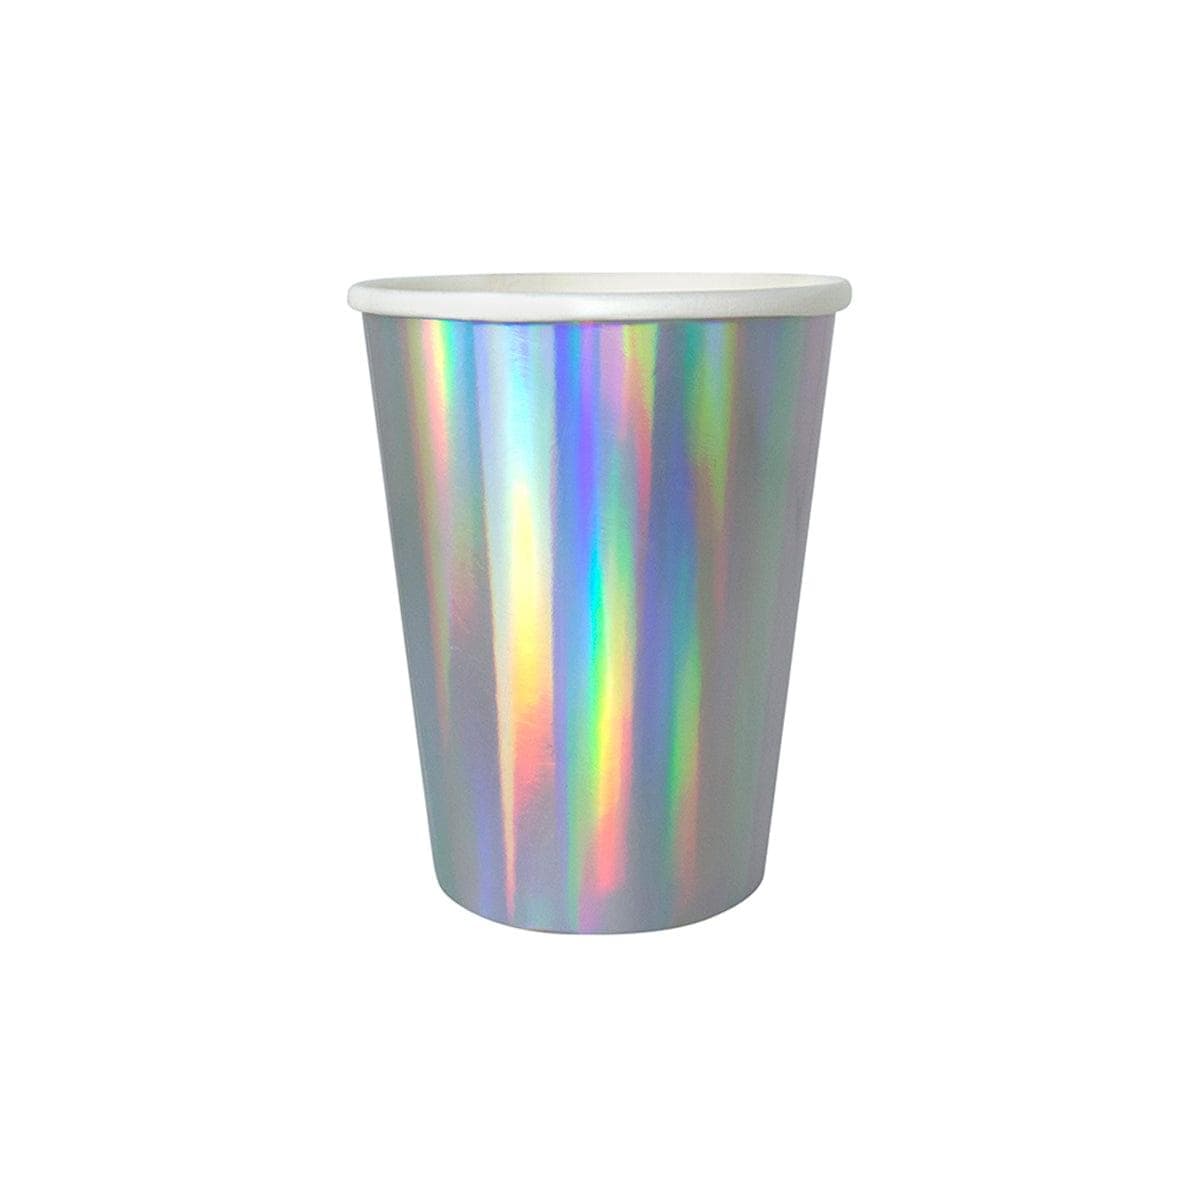 YIWU SANDY PAPER PRODUCTS CO., LTD Everyday Entertaining Iridescent Cups, 9 Oz, 8 Count